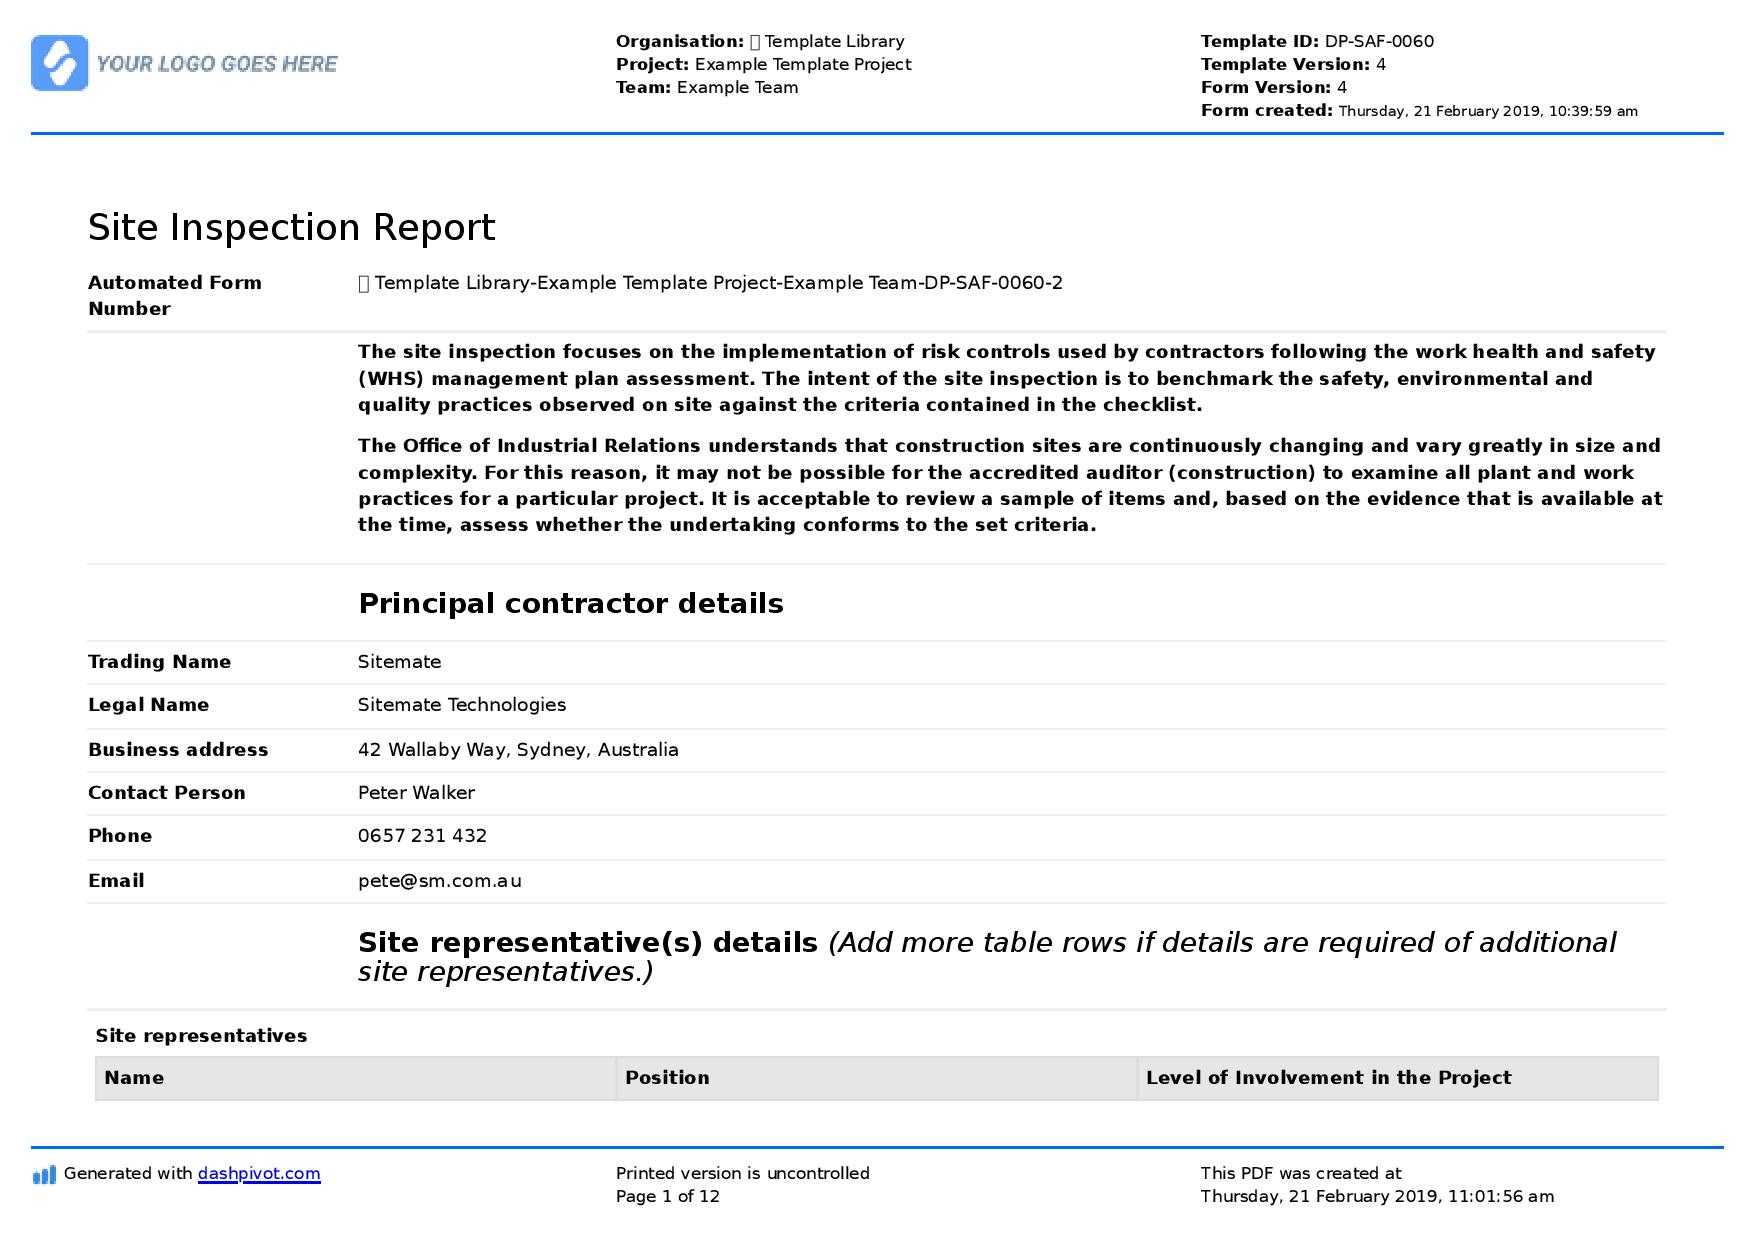 Site Inspection Report: Free Template, Sample And A Proven For Daily Inspection Report Template